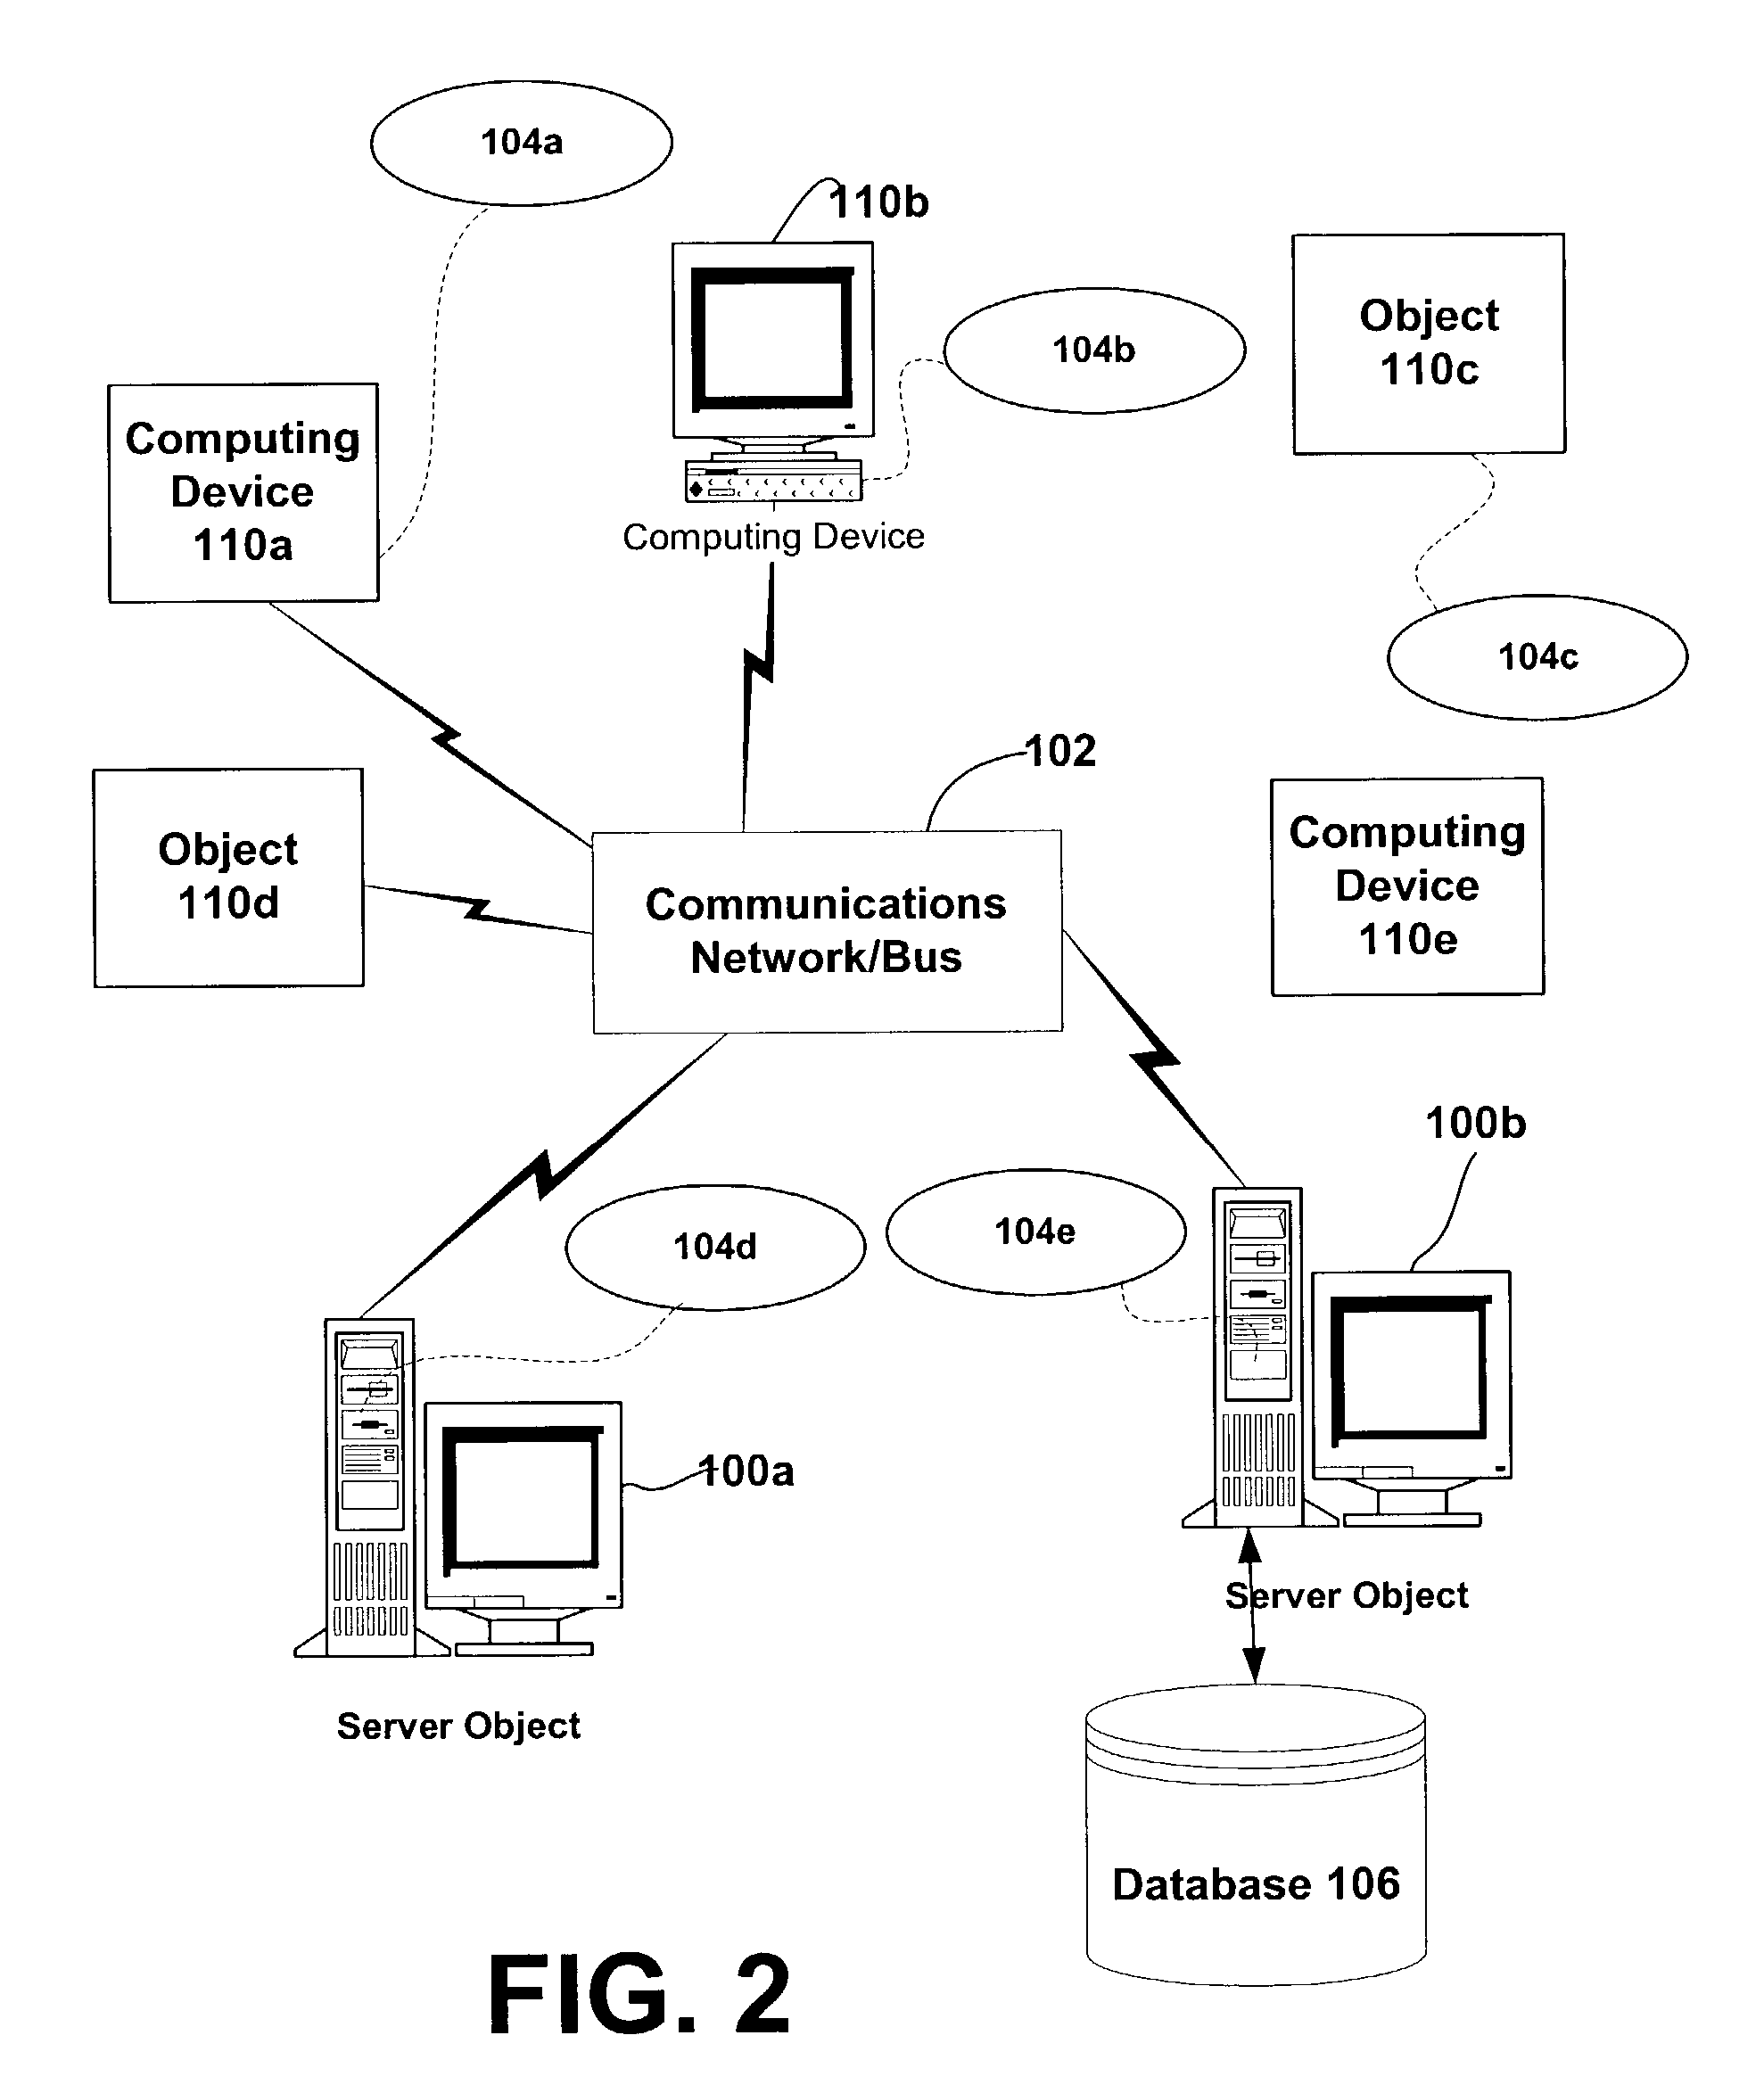 Managing a distributed computing system